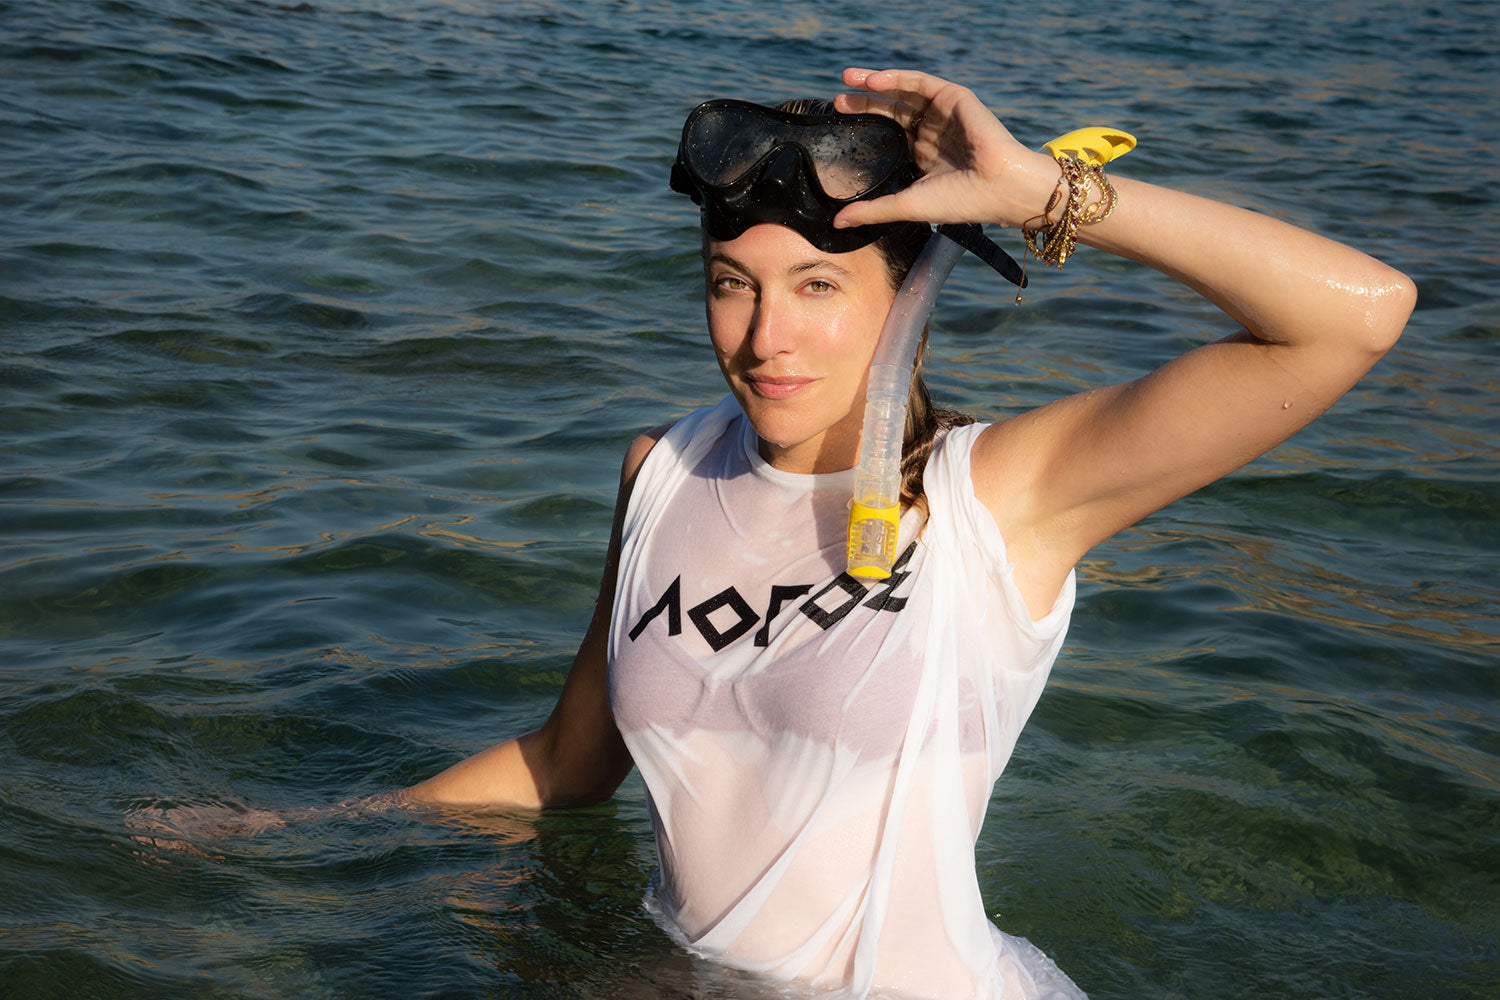 ERMOU CLASSICS 'LOGOS' TEE IN WHITE  - Modeled by Saranna in Mykonos